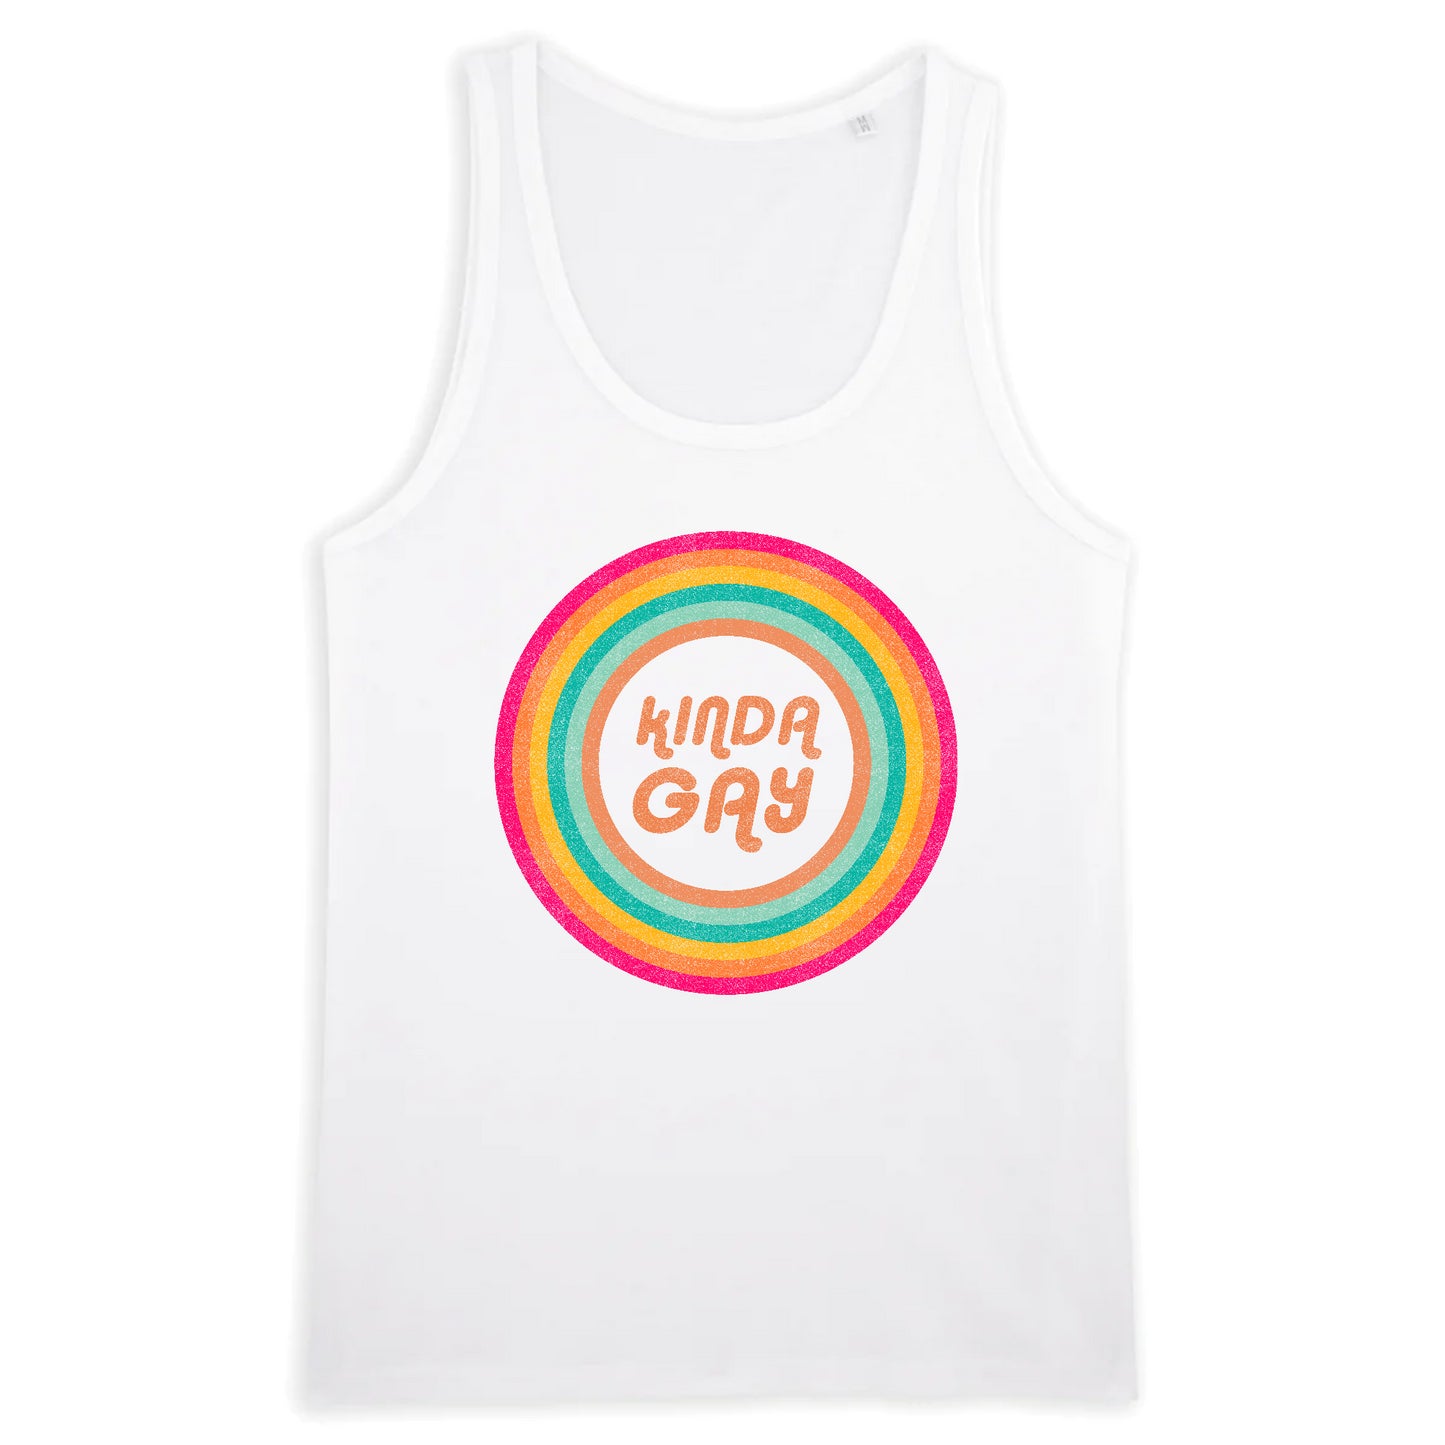 Kinda gay tank top for men with gay colors and perfect for the upcoming gay pride